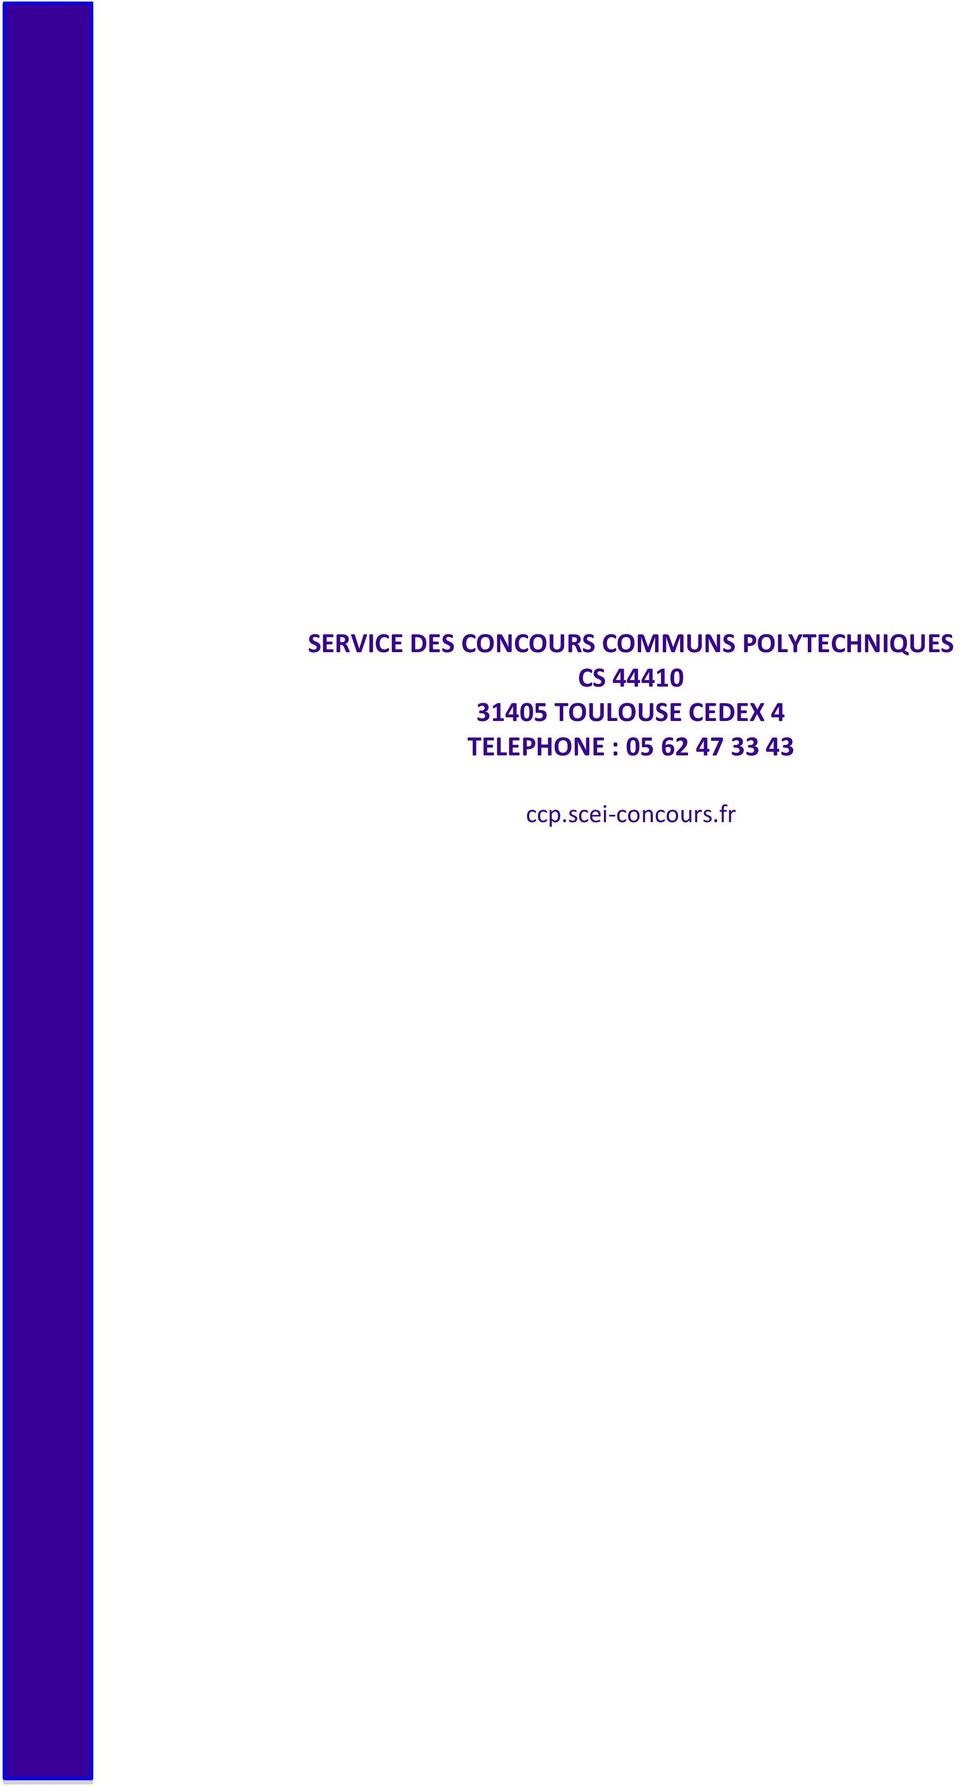 TOULOUSE CEDEX 4 TELEPHONE :